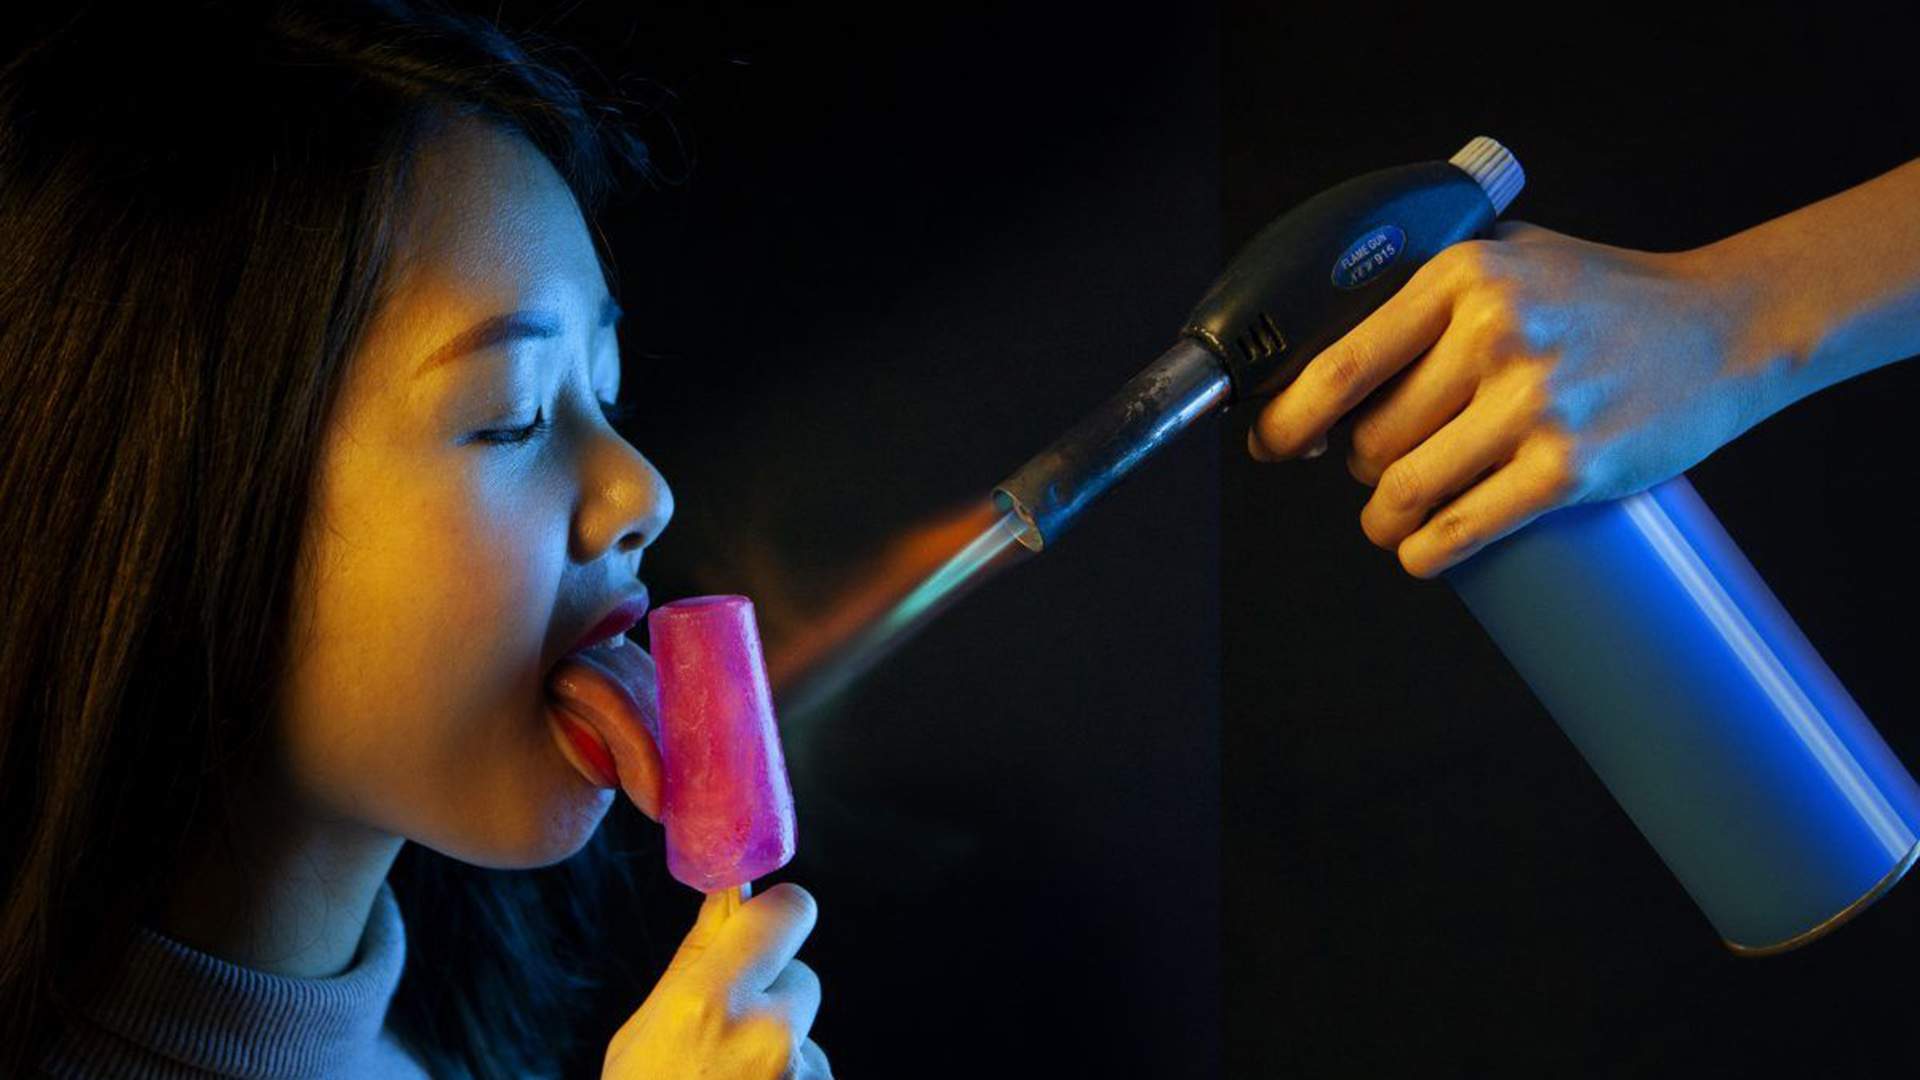 Food Artists Bompas & Parr Have Invented Non-Melting Icy Poles